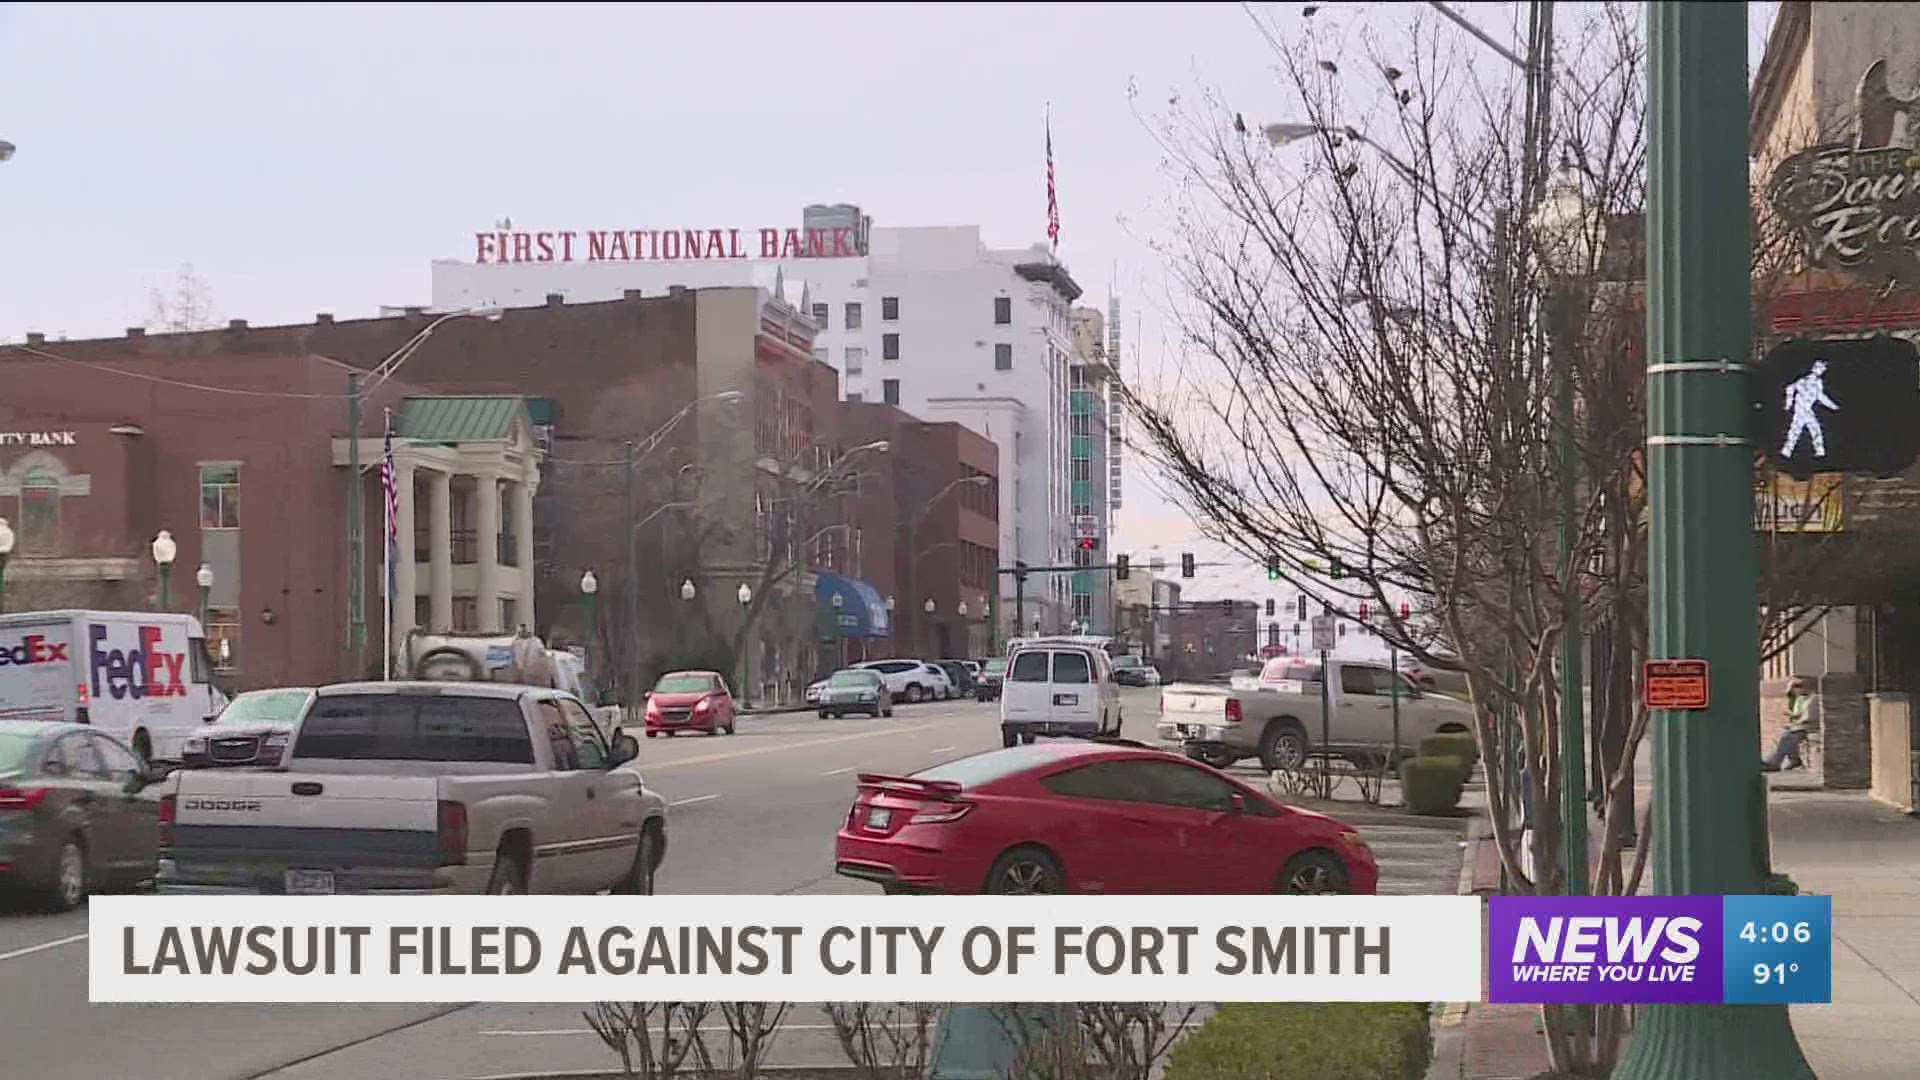 Joey McCutchen filed a lawsuit on June 4, 2021 in Sebastian County Circuit Court against the City of Fort Smith.